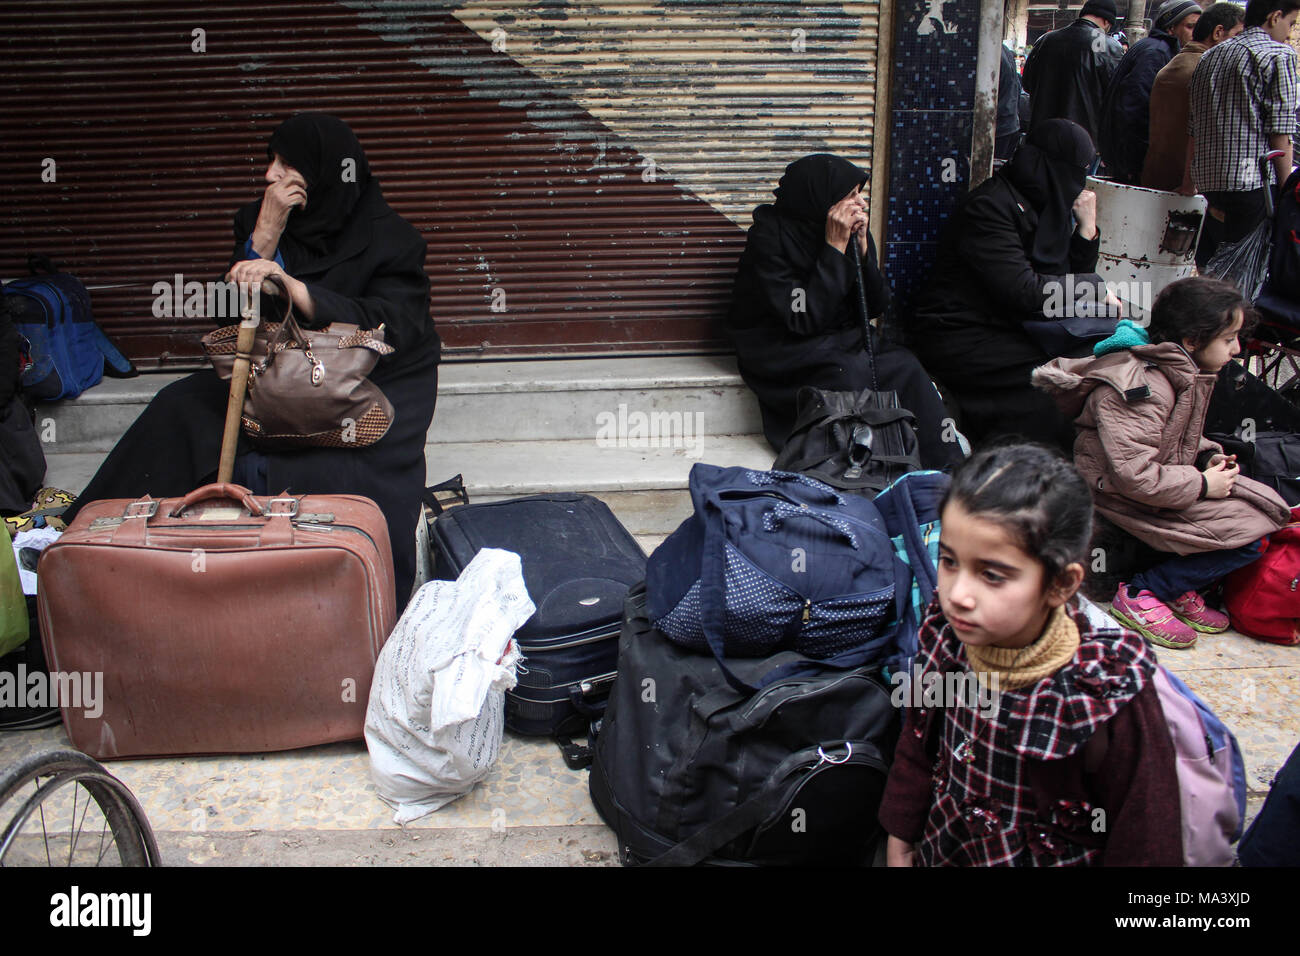 Douma, Syria. 28th Mar, 2018. Women and children seen with their luggages waiting for the evacuation bus.According to reports, civilians, mostly ill people and injured that need urgent medical attention, were evacuated from rebels-held areas in Eastern Ghouta to Damascus under the supervision of the Syrian Arab Red Crescent Credit: Muhmmad Al-Najjar/SOPA Images/ZUMA Wire/Alamy Live News Stock Photo